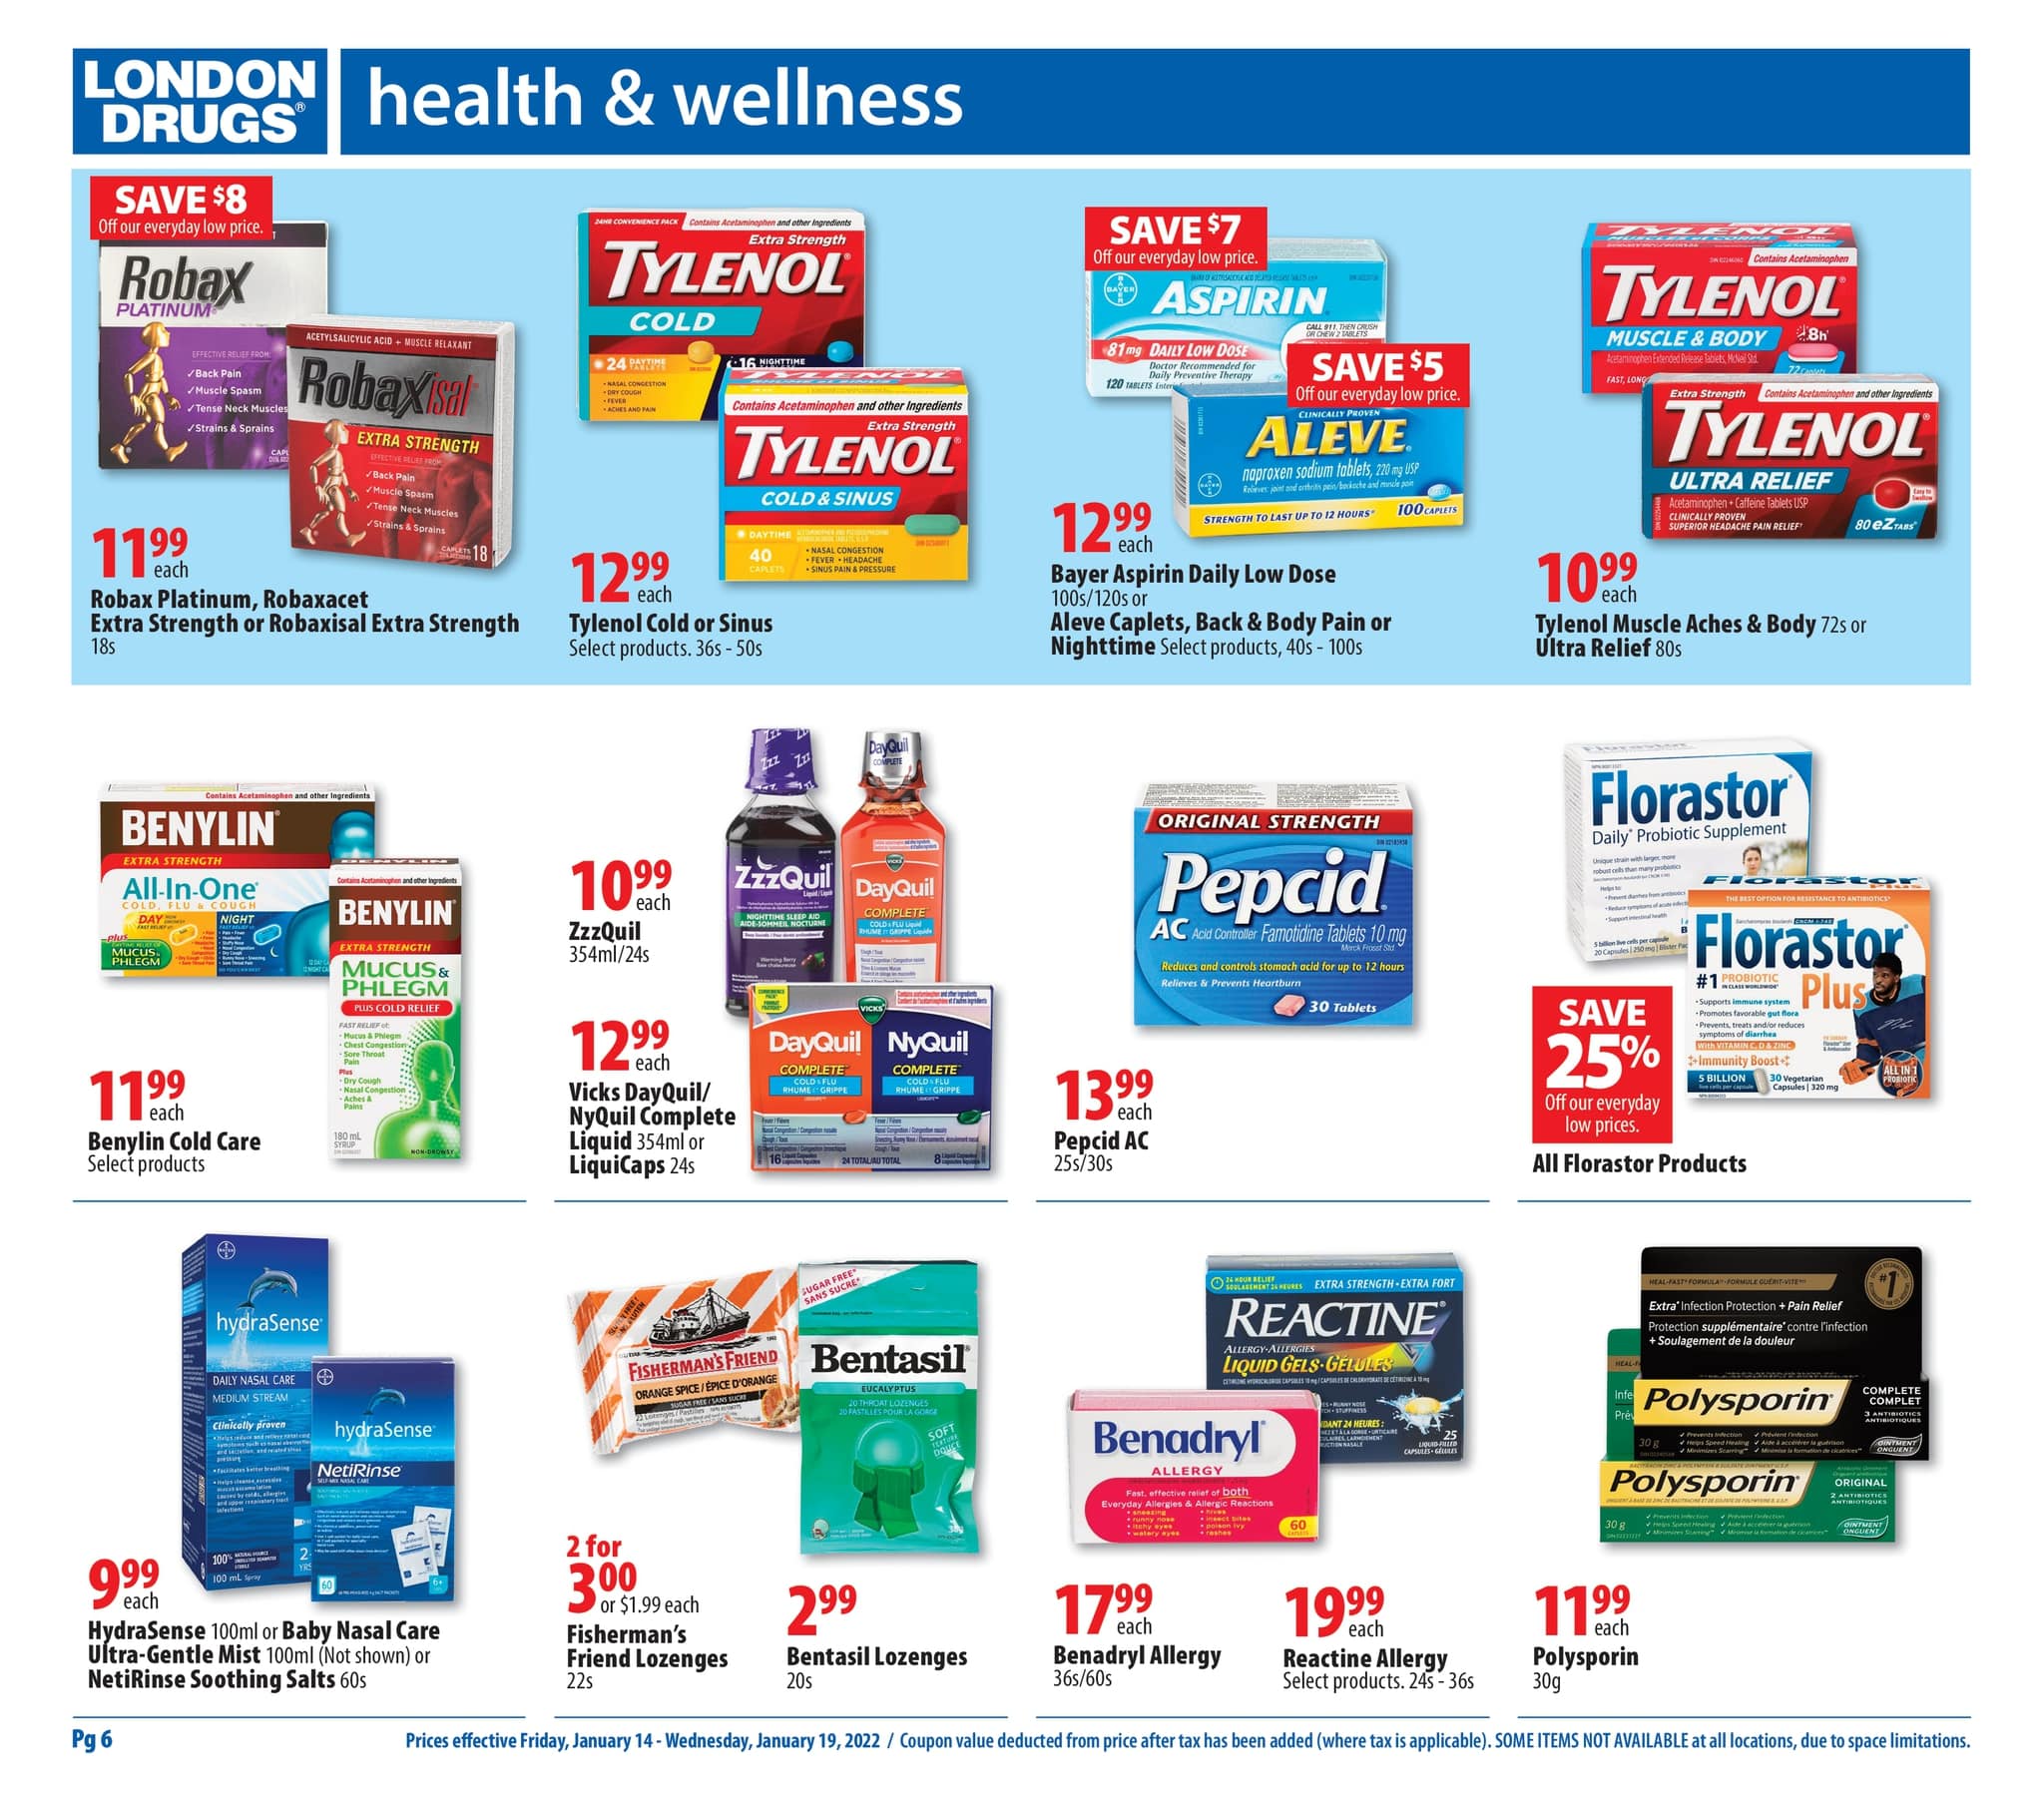 London Drugs - Weekly Flyer Specials - Page 6